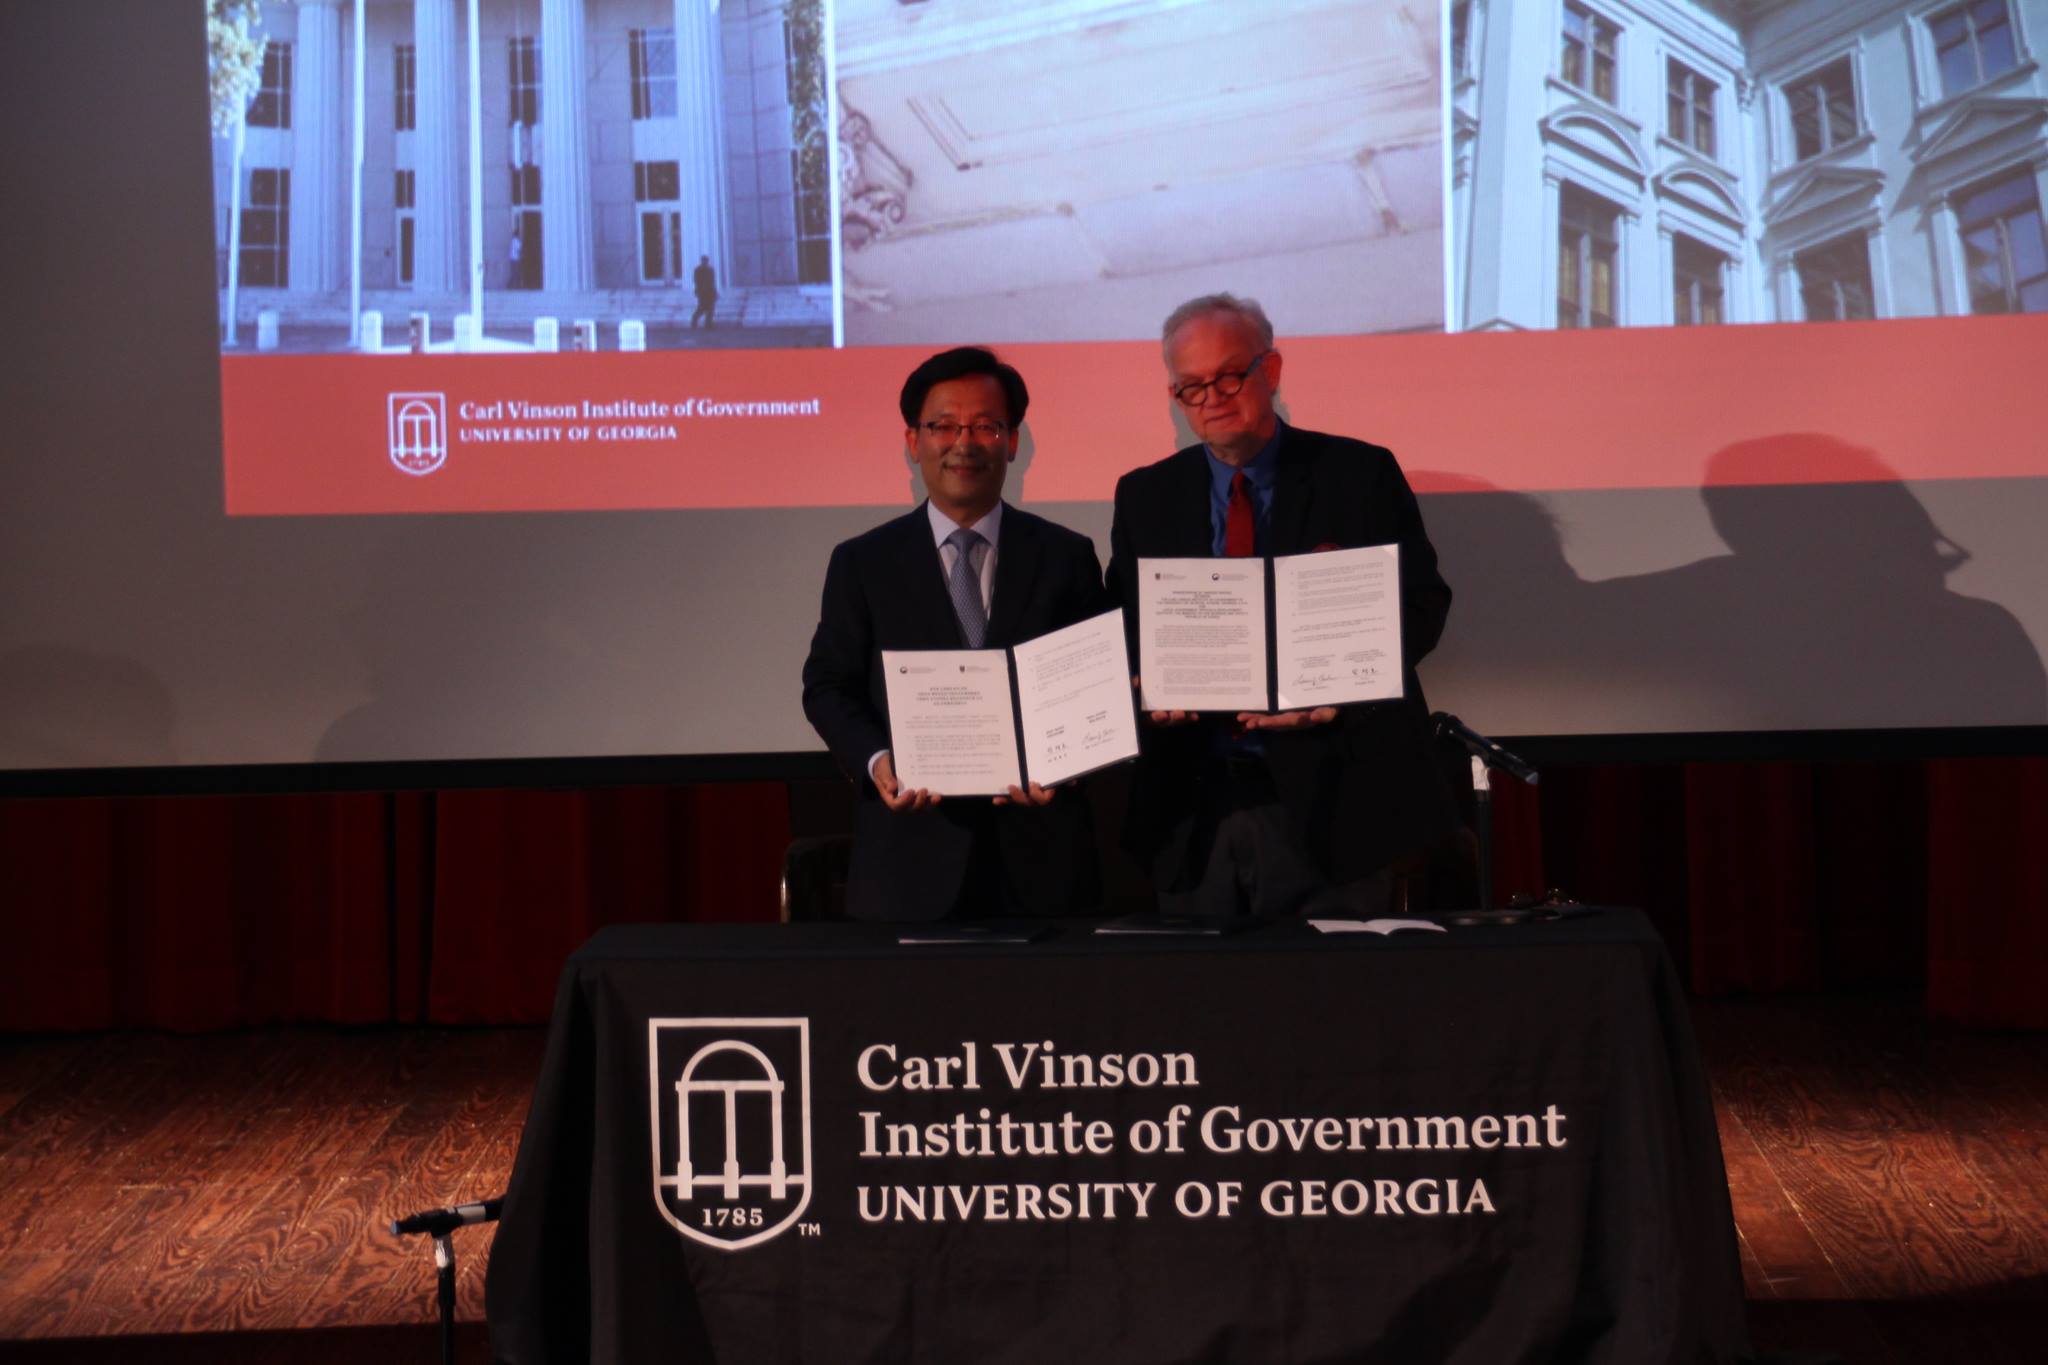 MOU in the US established as global leaders commence study abroad 큰 이미지[마우스 클릭 시 창닫기]